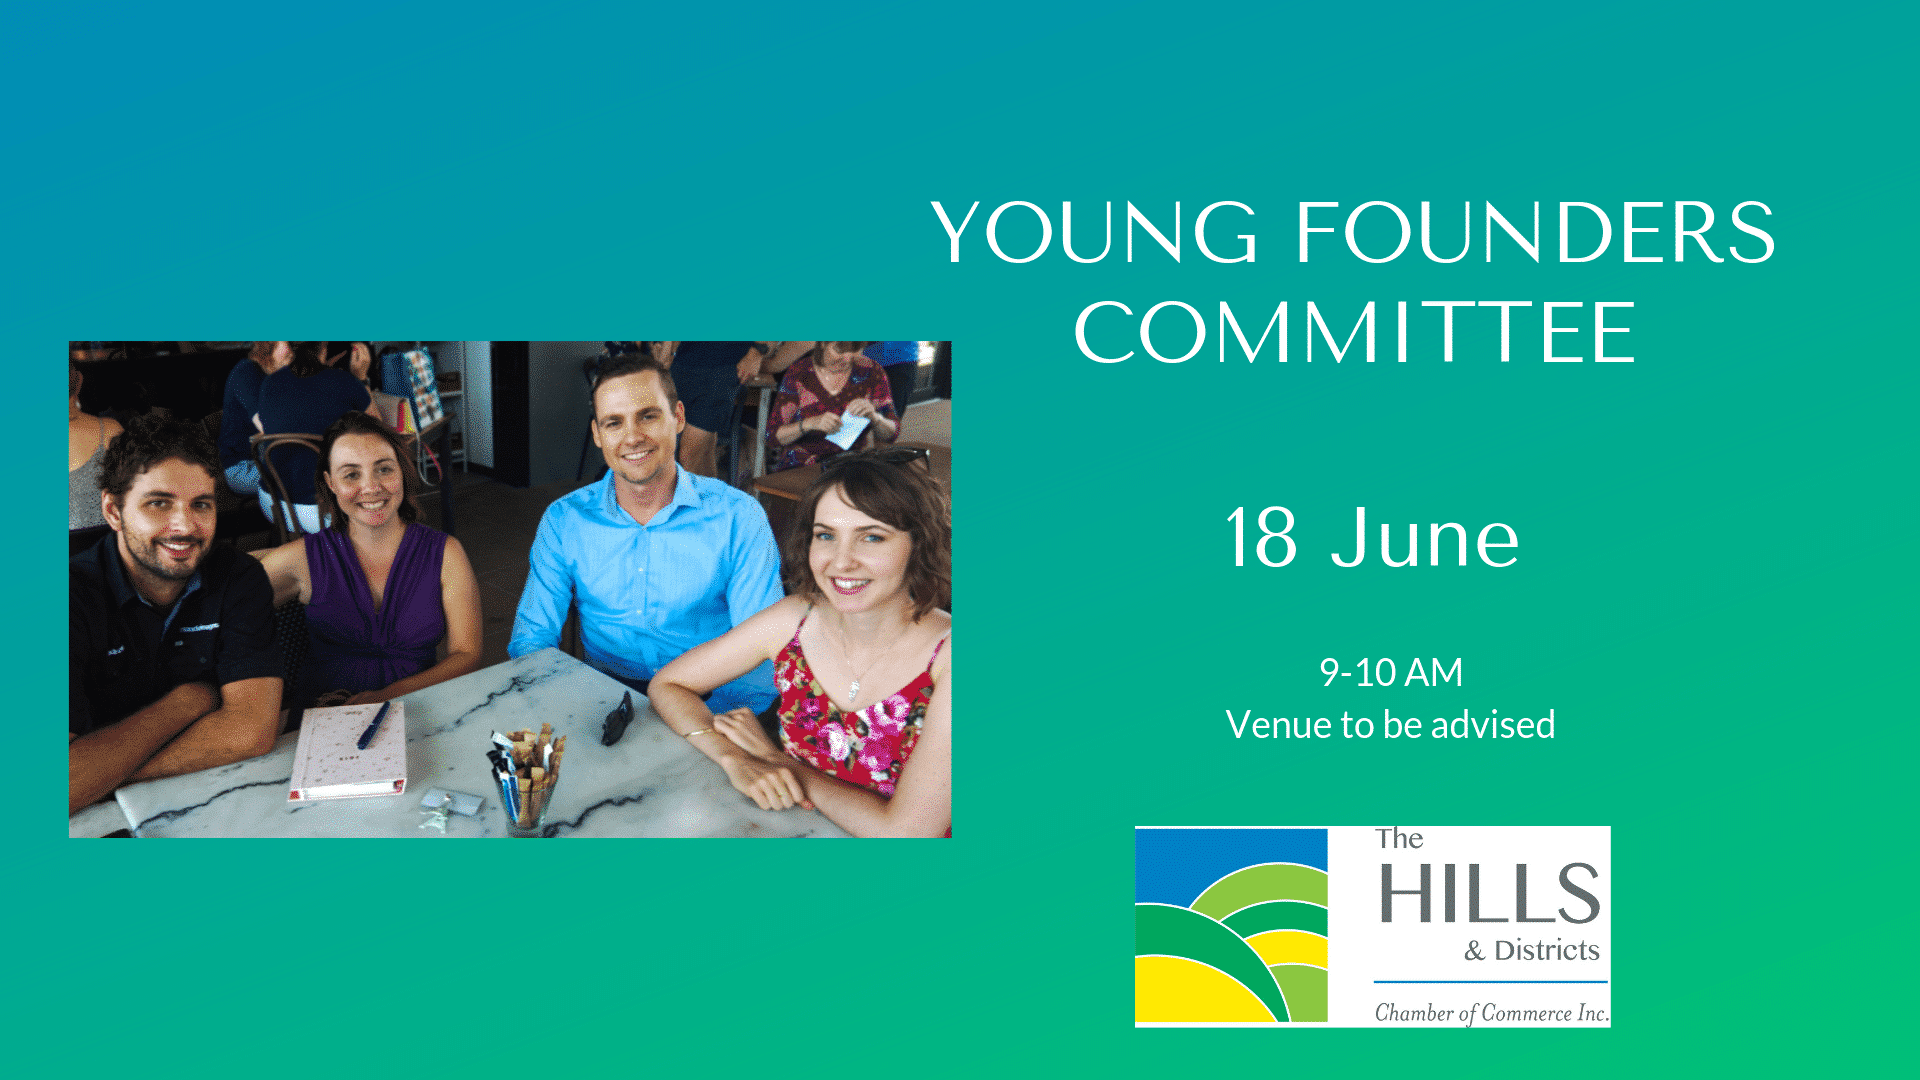 Young Founders Committee Committee